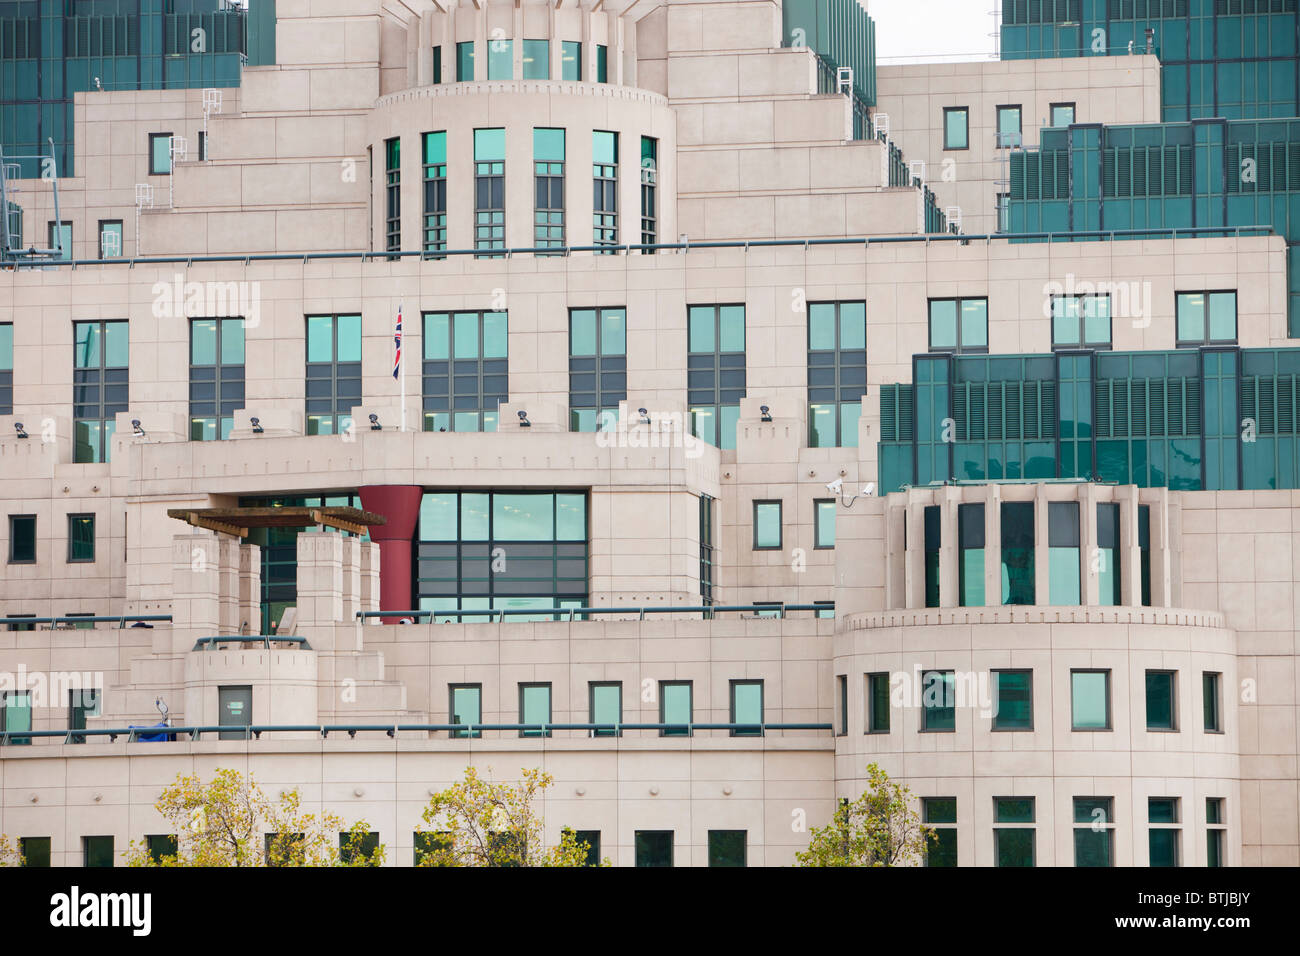 The SIS Building, headquarters of MI6 in Vauxhall, London, UK. Stock Photo